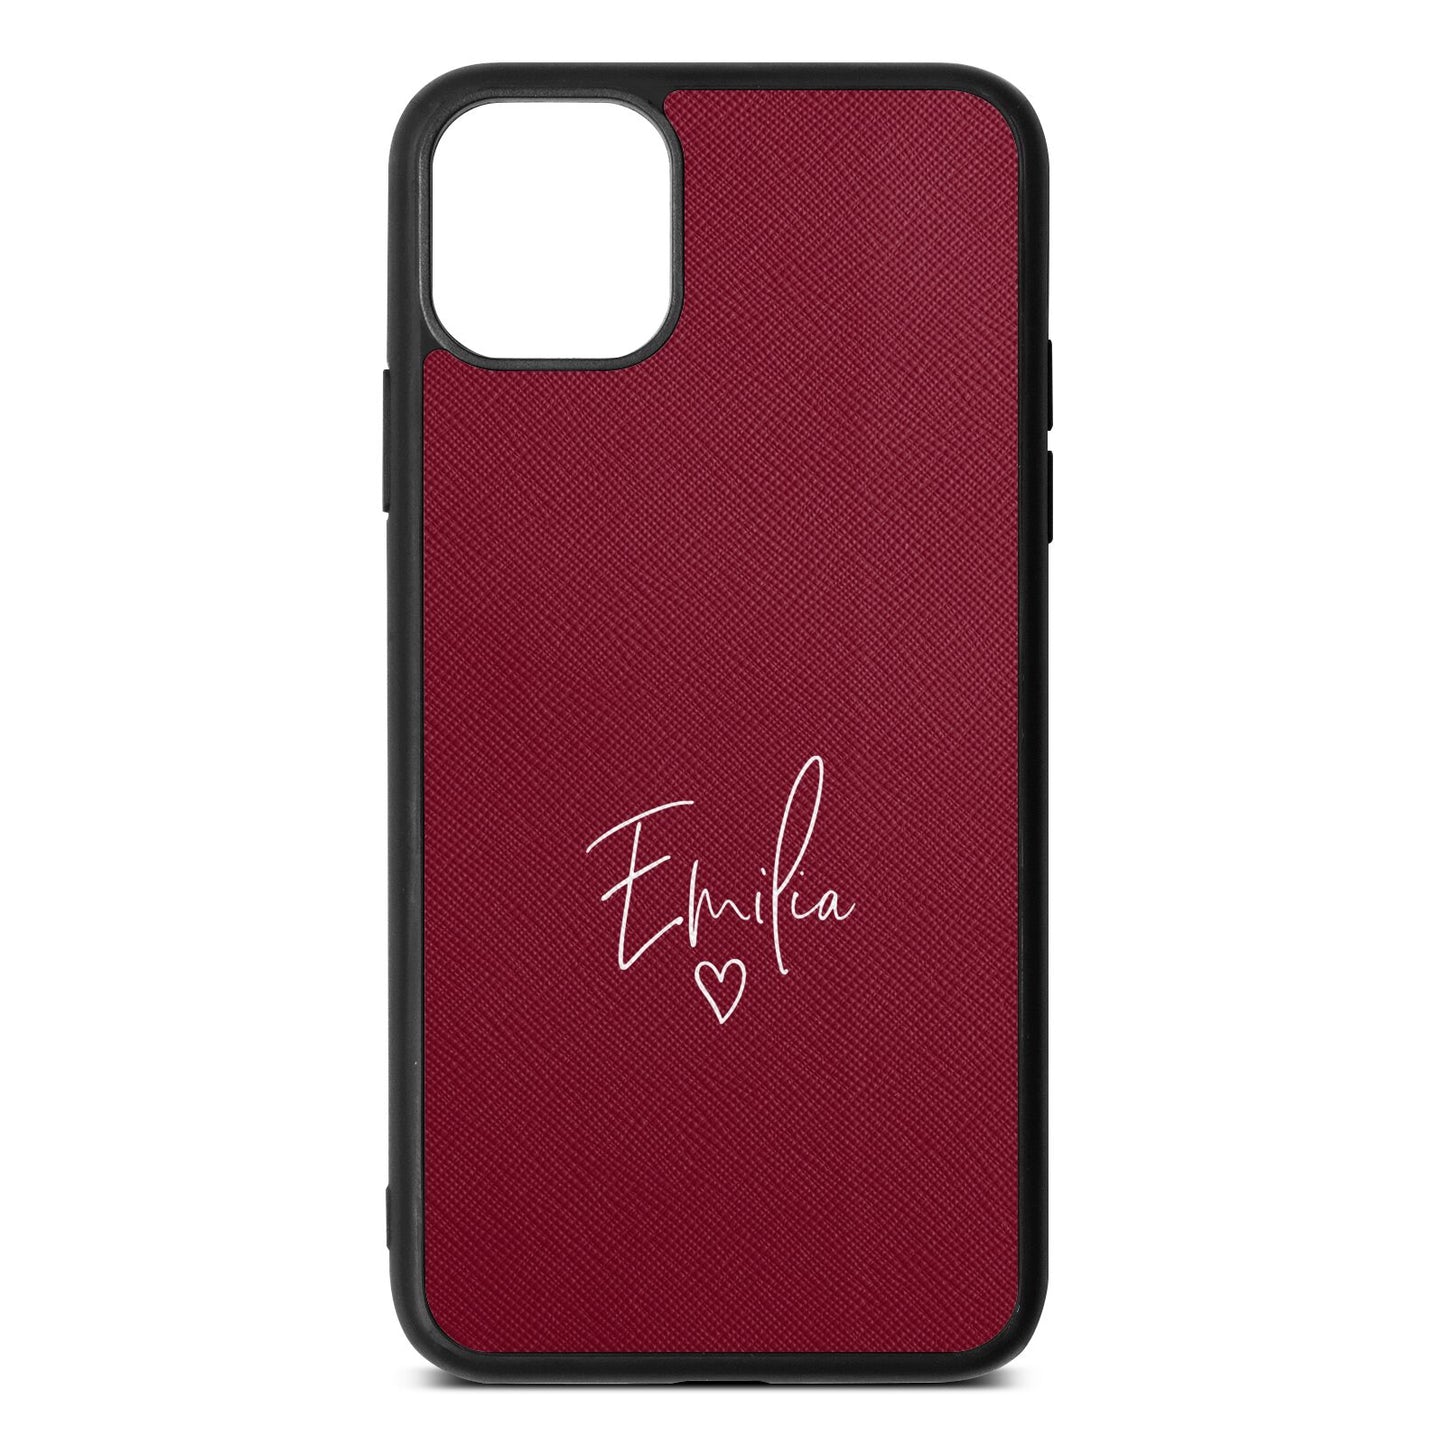 White Handwritten Name Transparent Wine Red Saffiano Leather iPhone 11 Pro Max Case